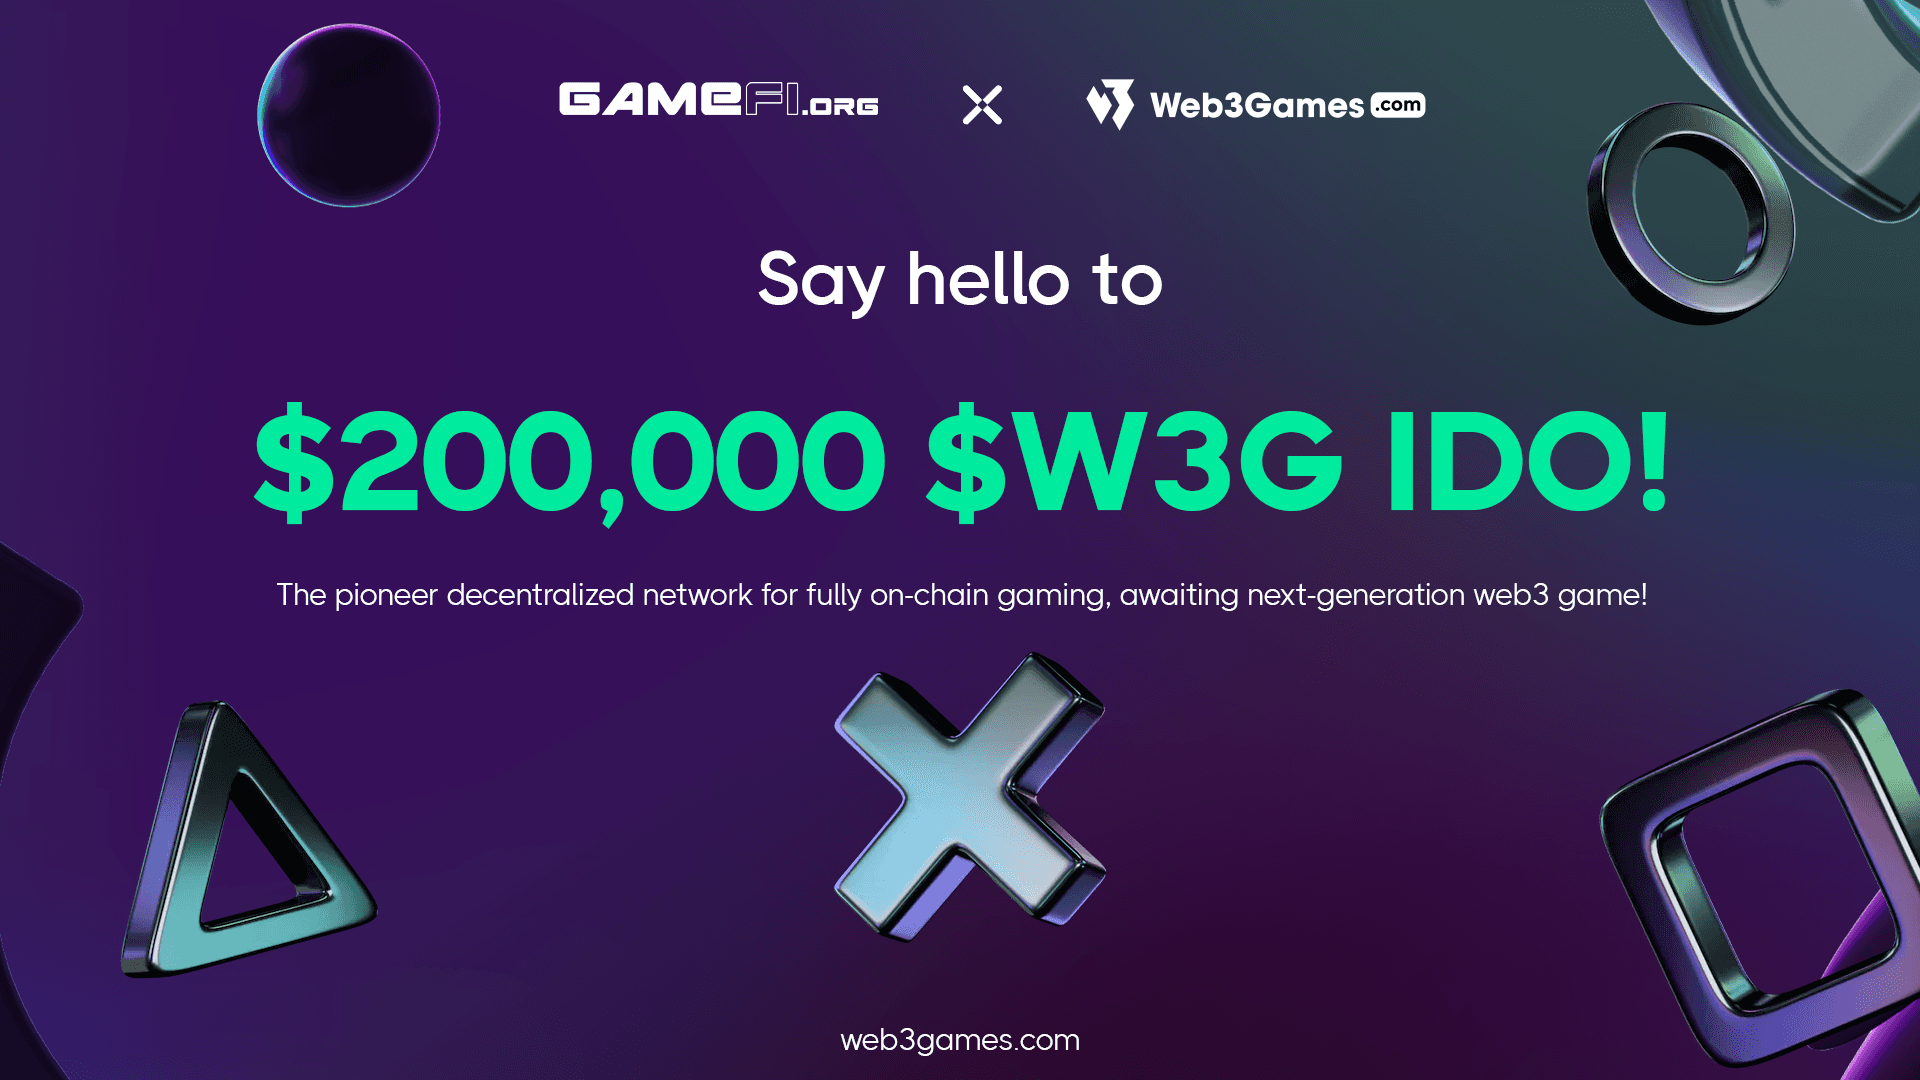 Join Web3Games.com $200,000 $W3G IDO - Decentralized Network Built for Fully On-chain Gaming!